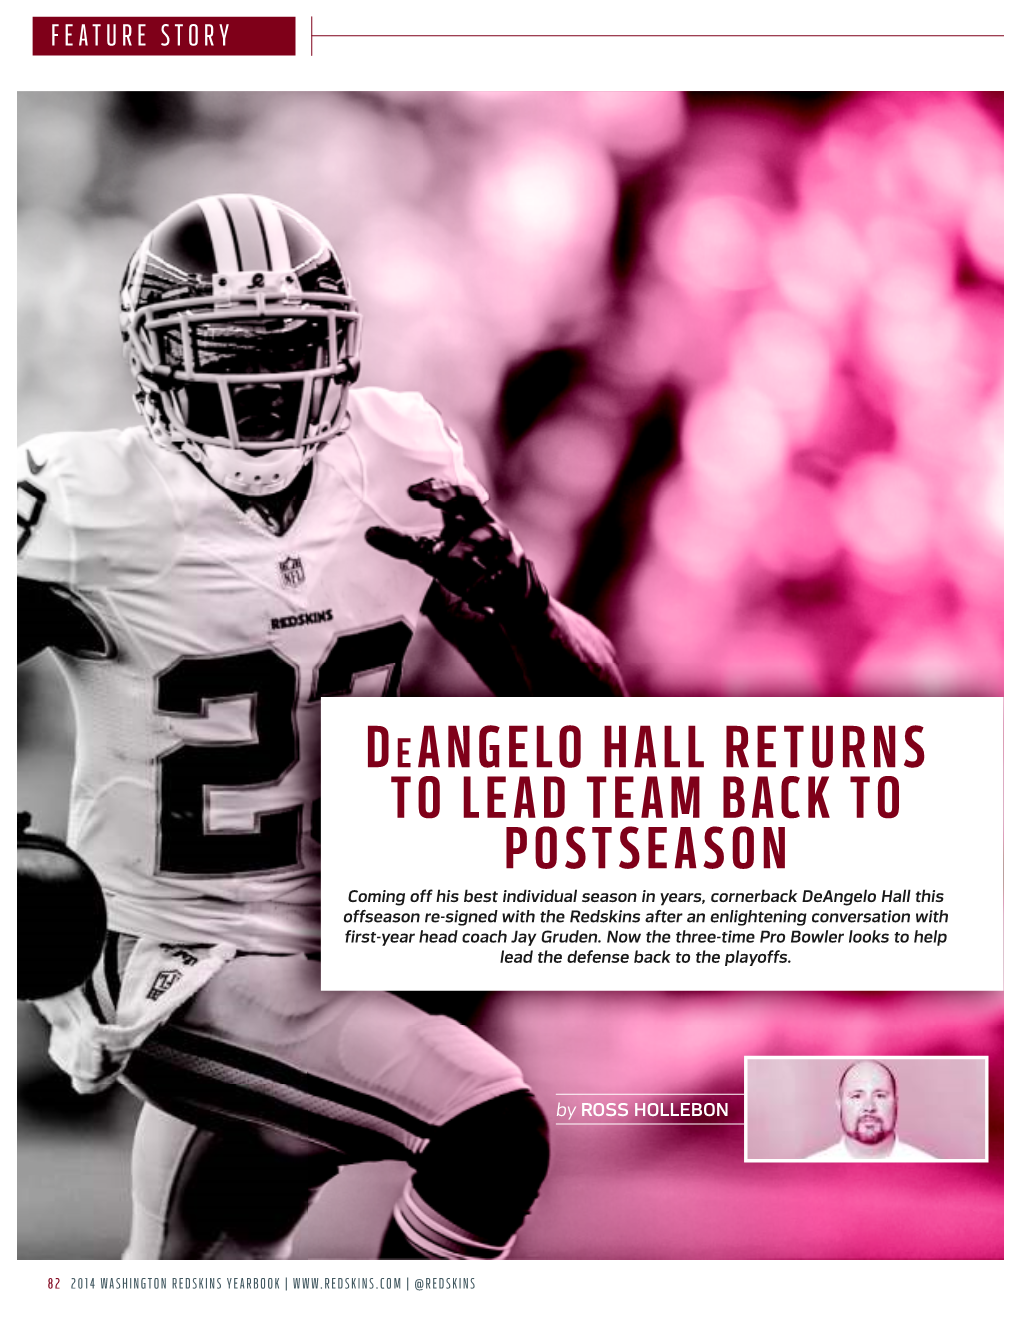 Deangelo Hall Returns to Lead Team Back To